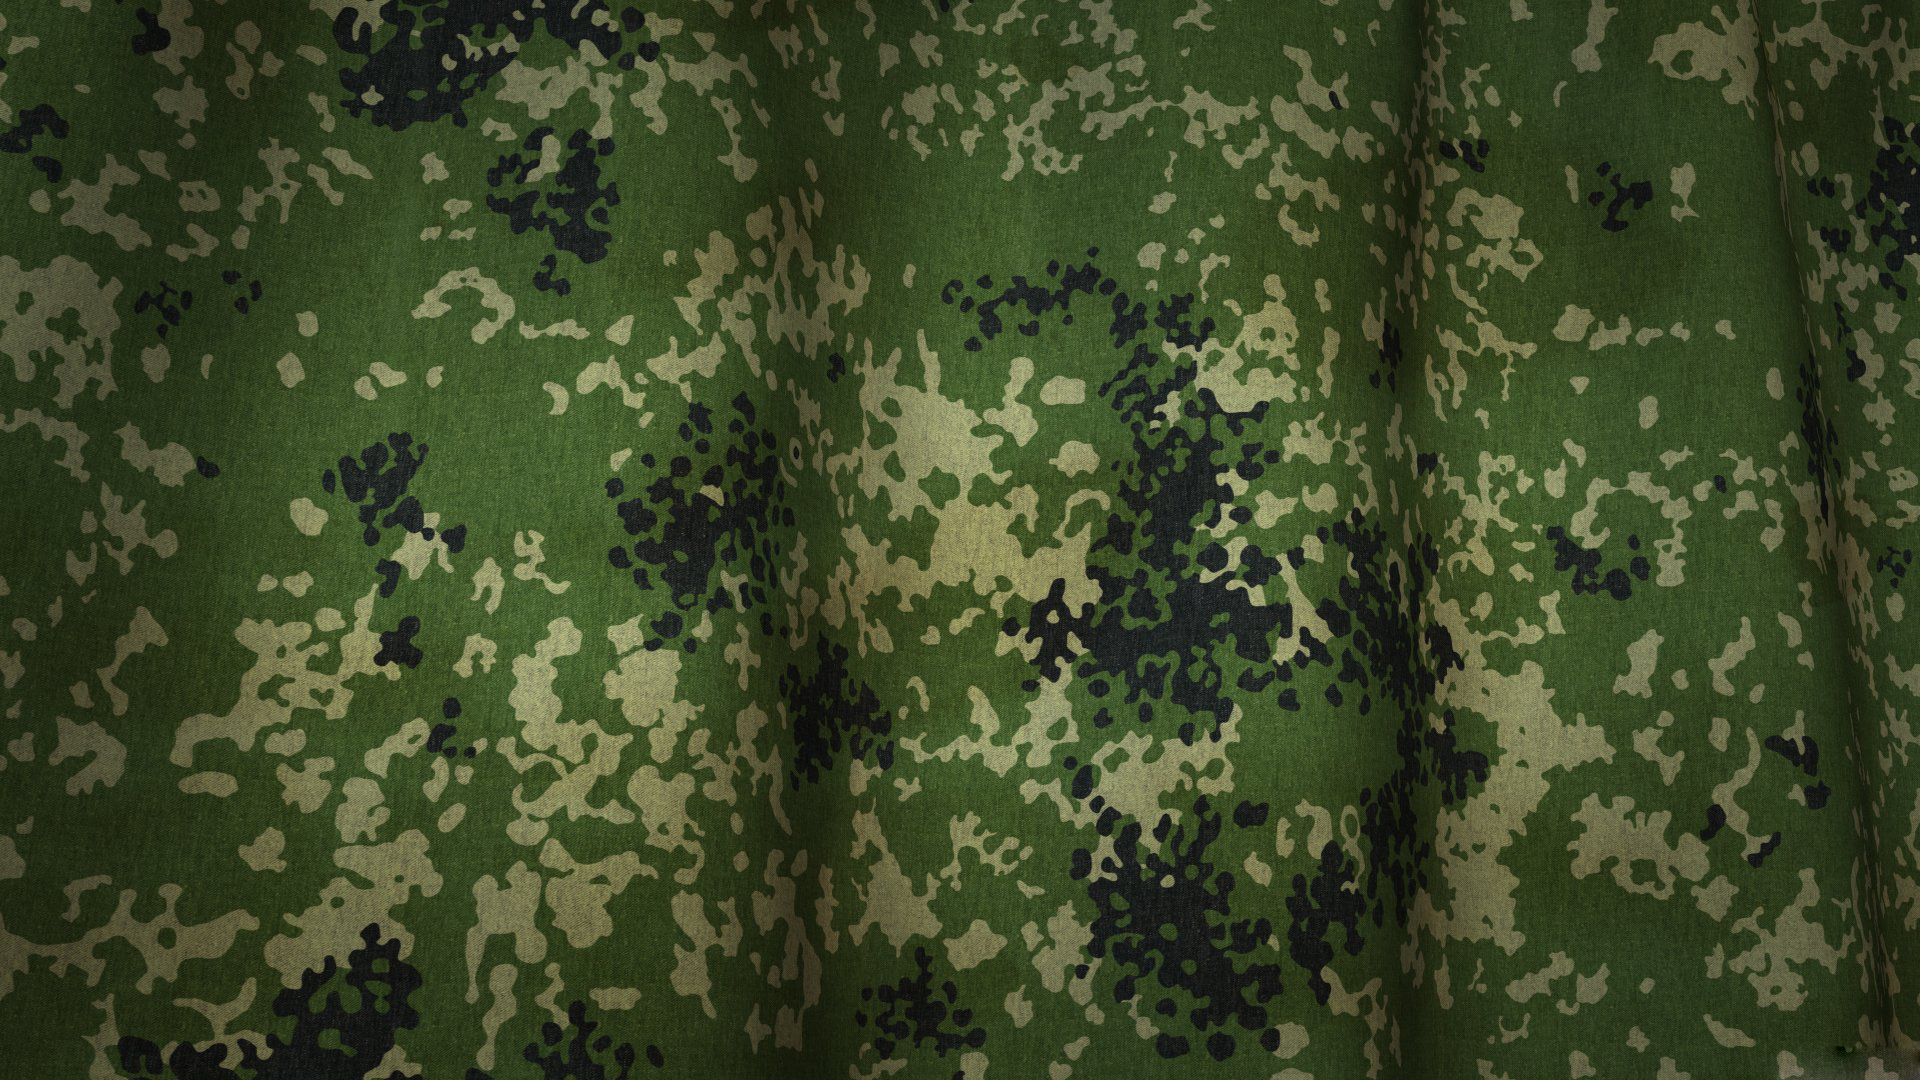 Download wallpapers summer camouflage green camouflage texture military  textures camouflage textures green camouflage background military  backgrounds for desktop free Pictures for desktop free